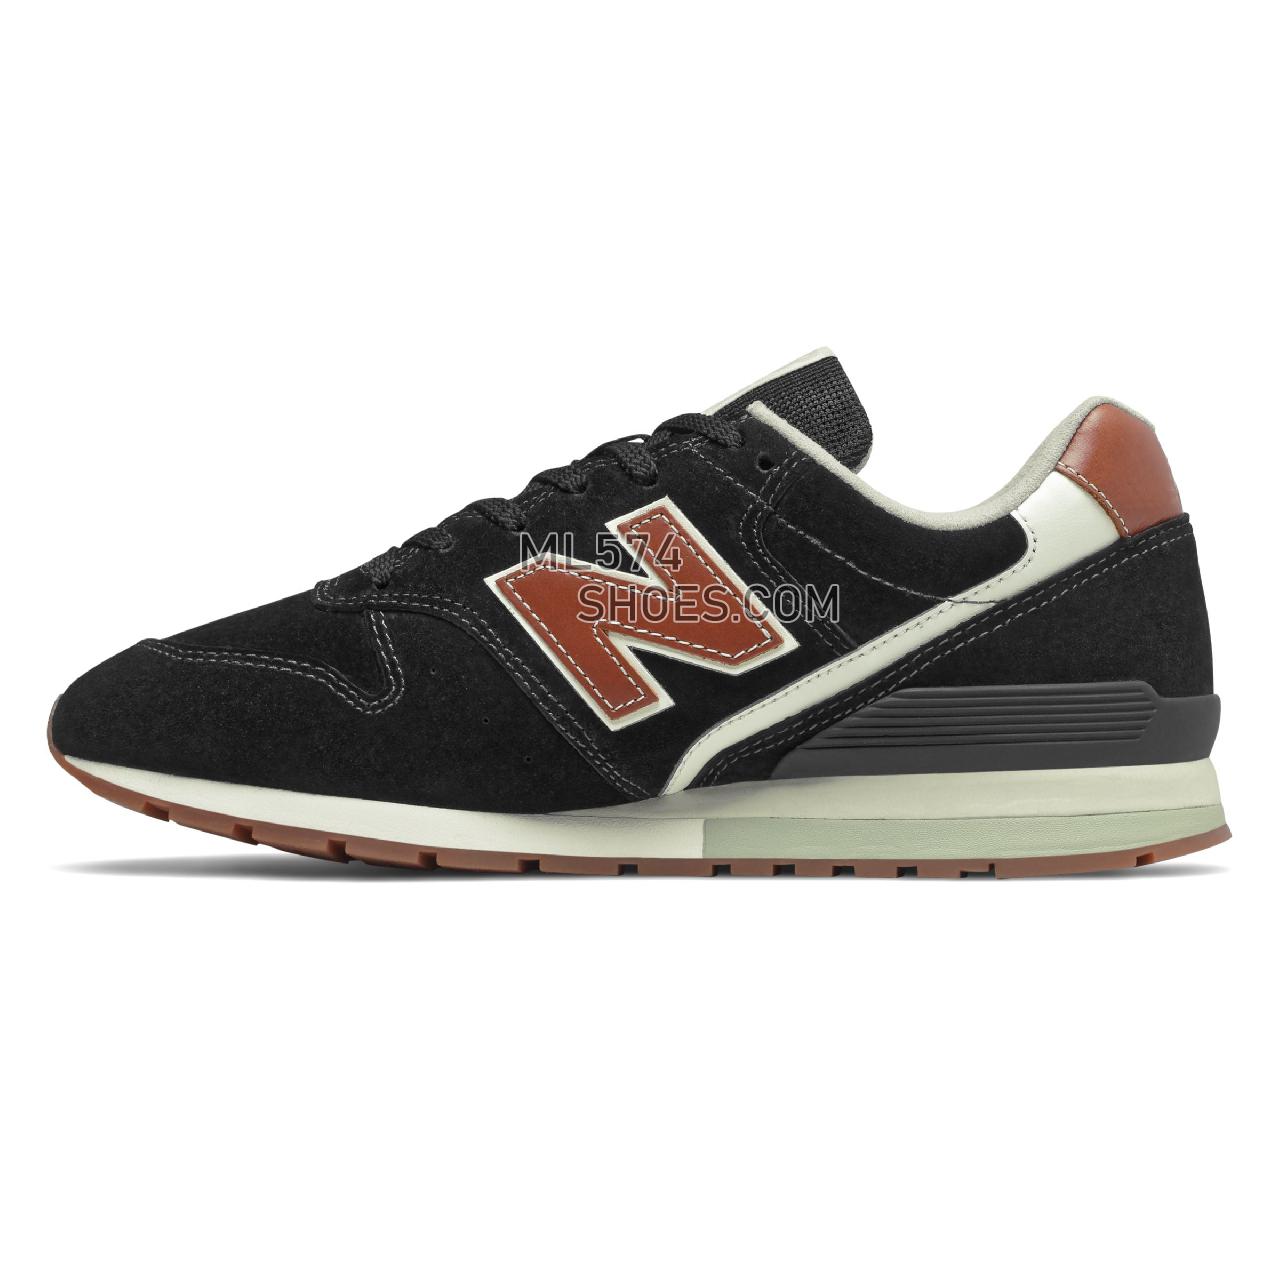 New Balance 996v2 - Men's Classic Sneakers - Black with Camel - CM996BC